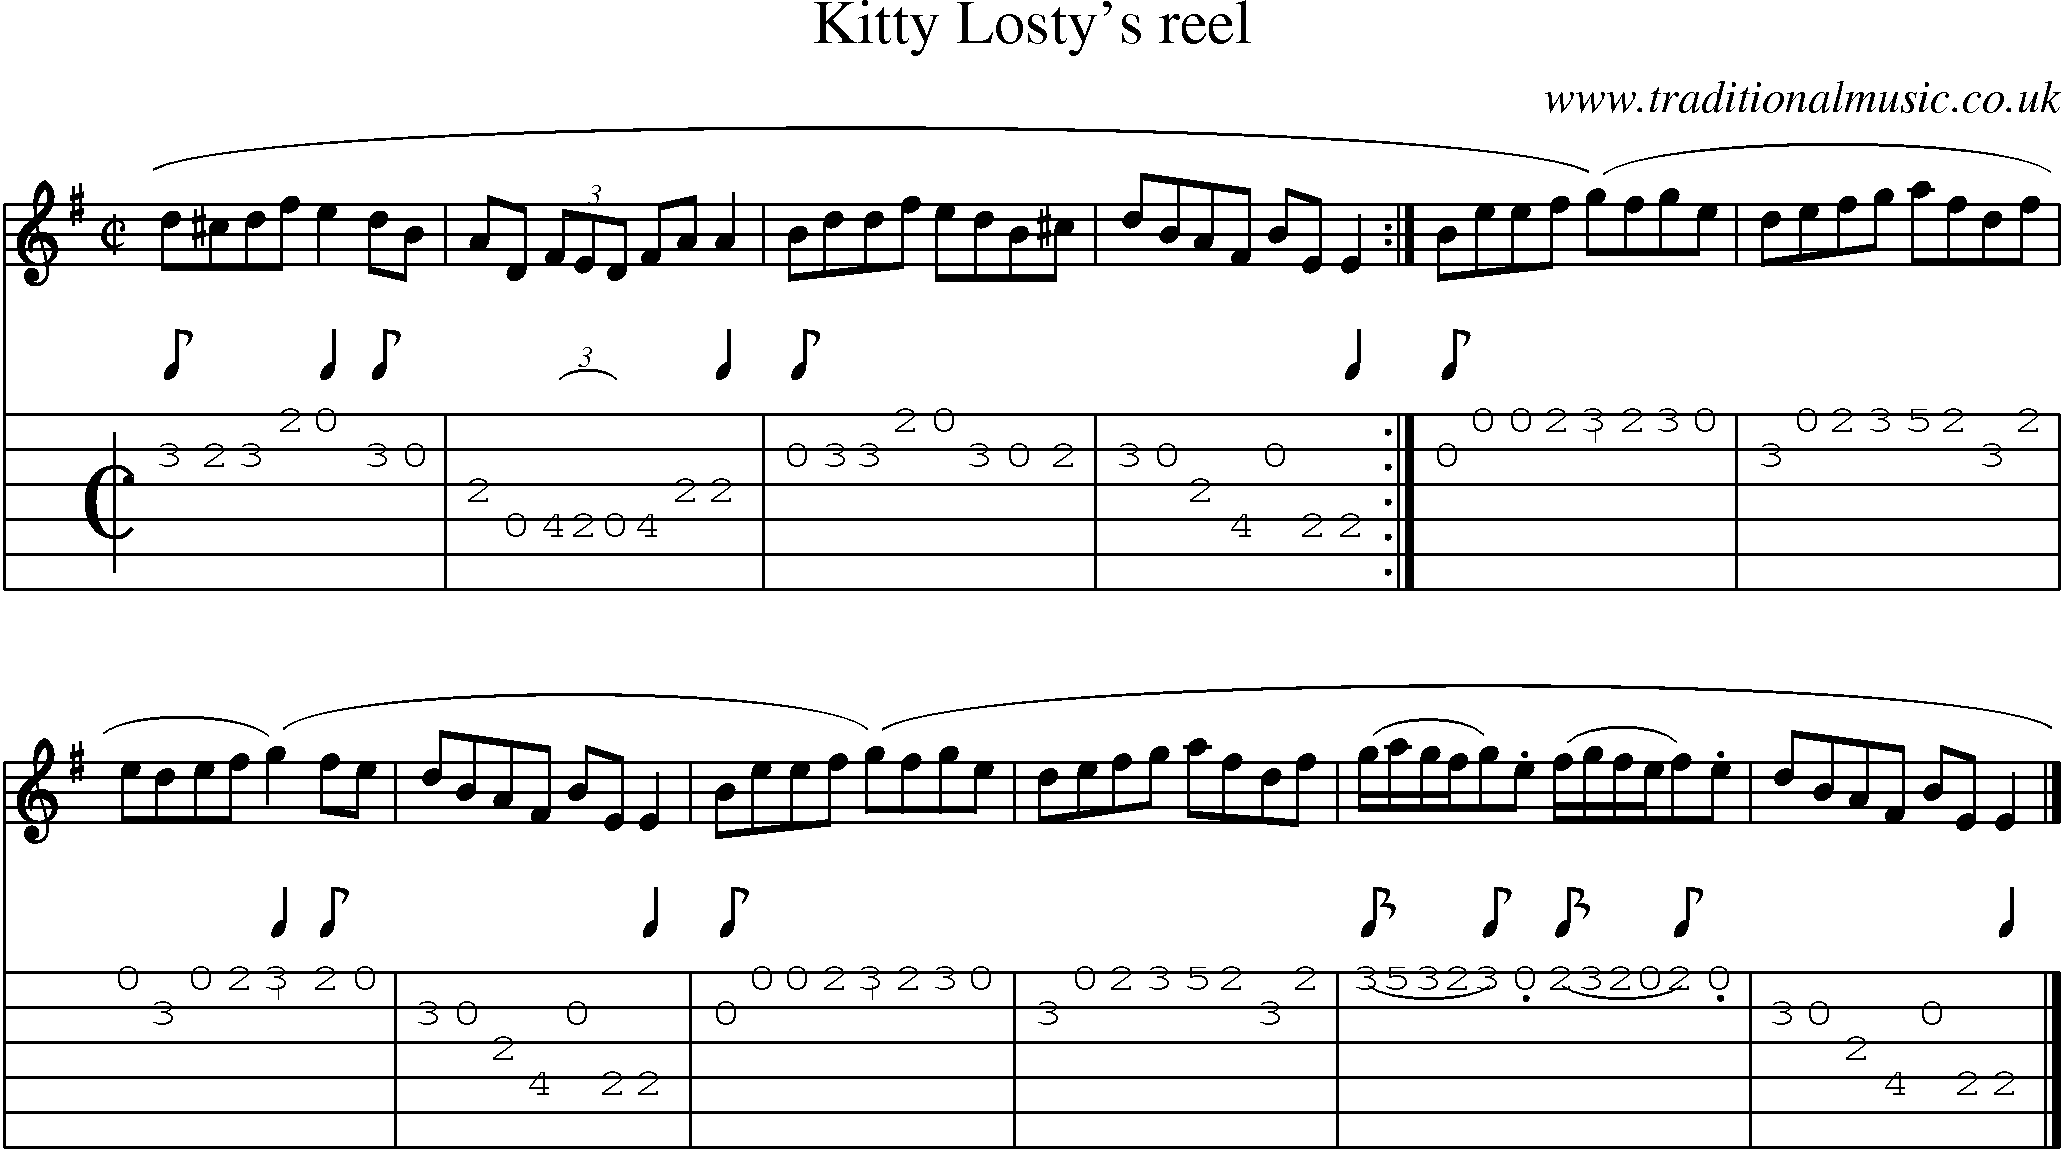 Music Score and Guitar Tabs for Kitty Lostys Reel